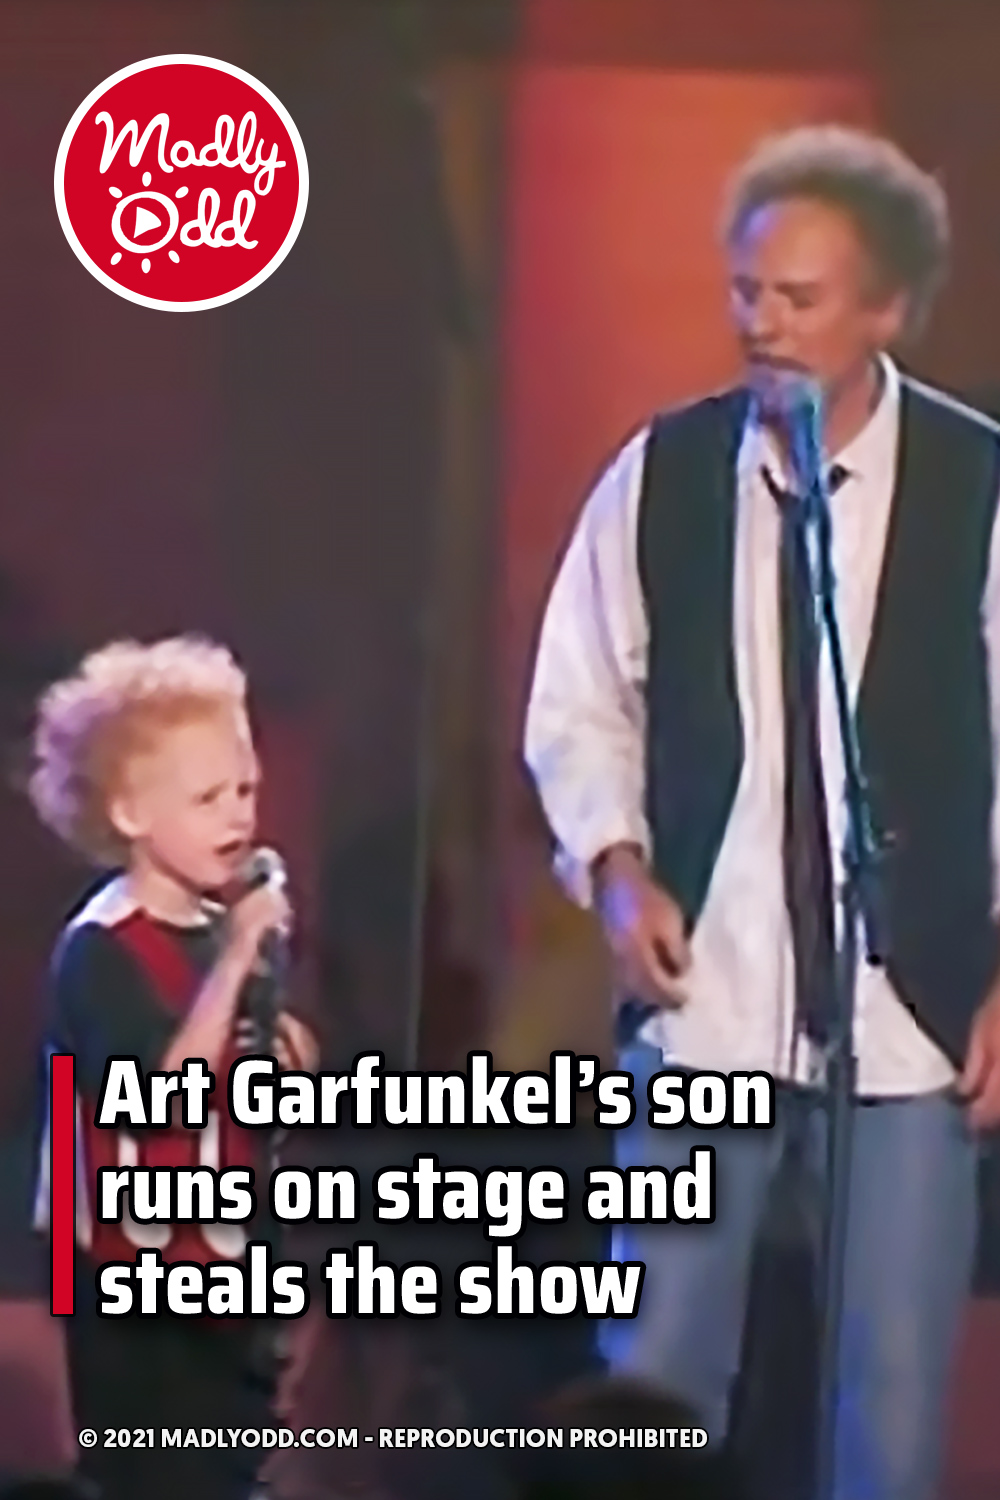 Art Garfunkel’s son runs on stage and steals the show